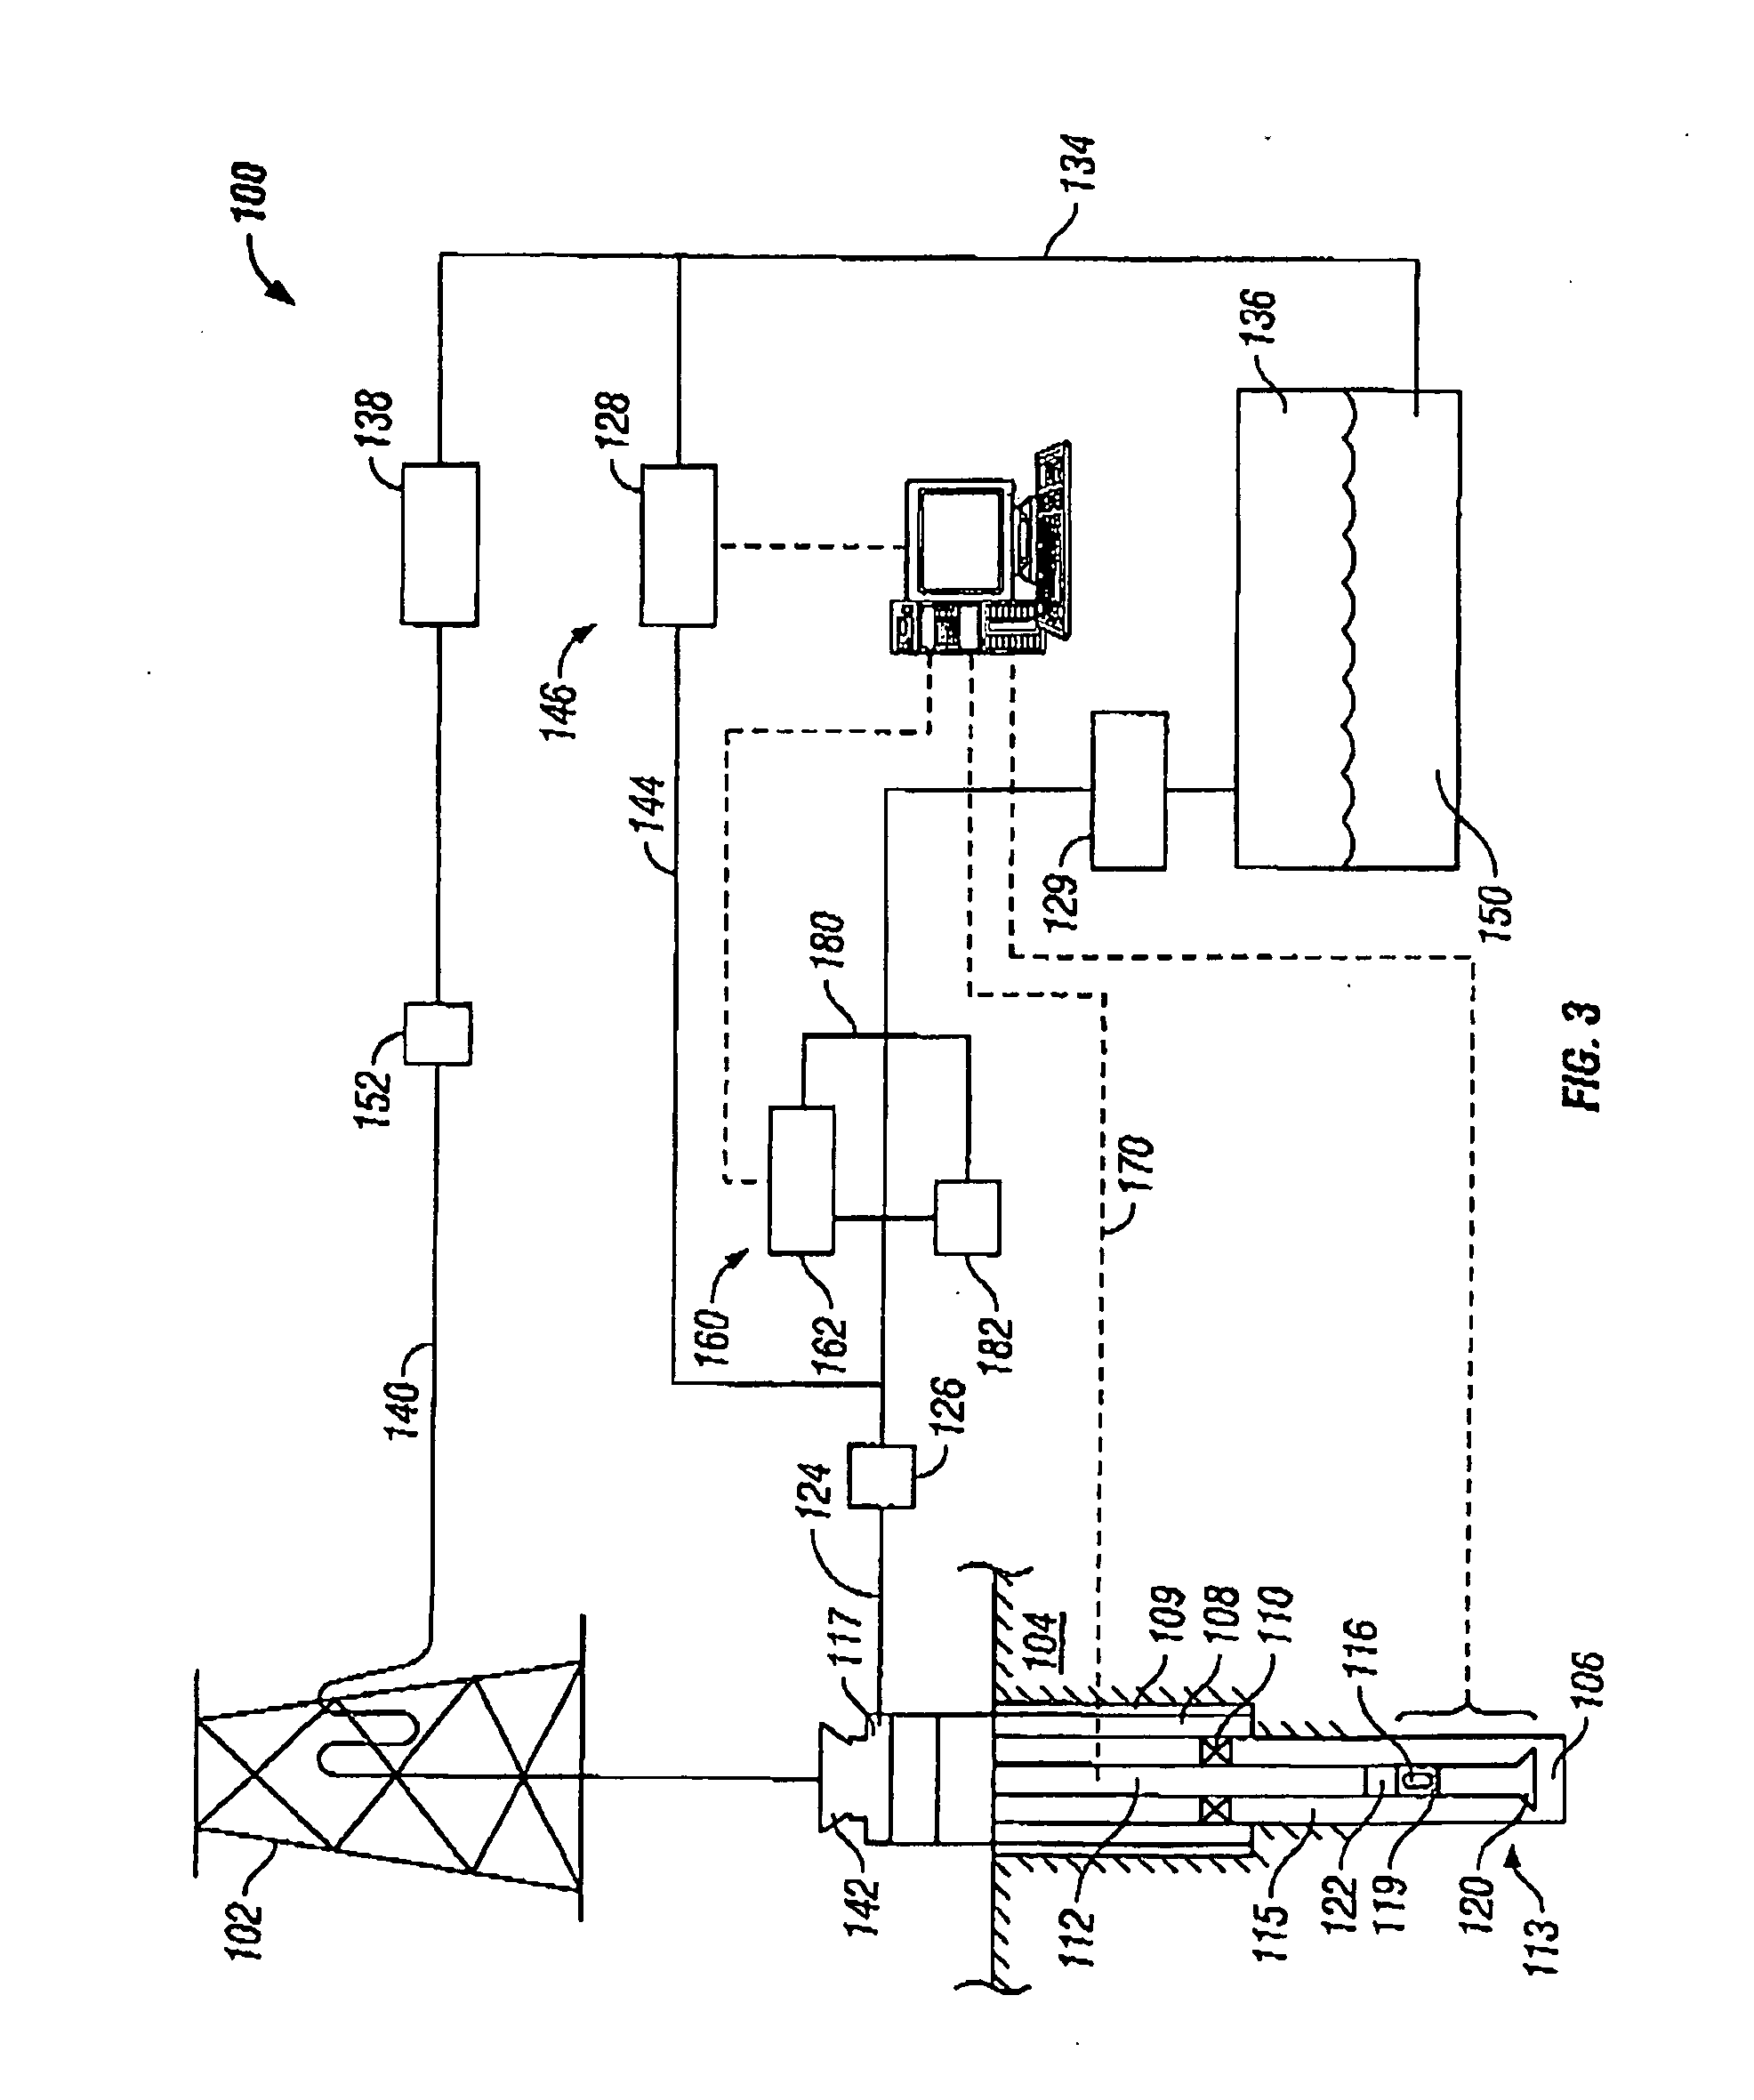 Method and apparatus for controlling bottom hole pressure in a subterranean formation during rig pump operation